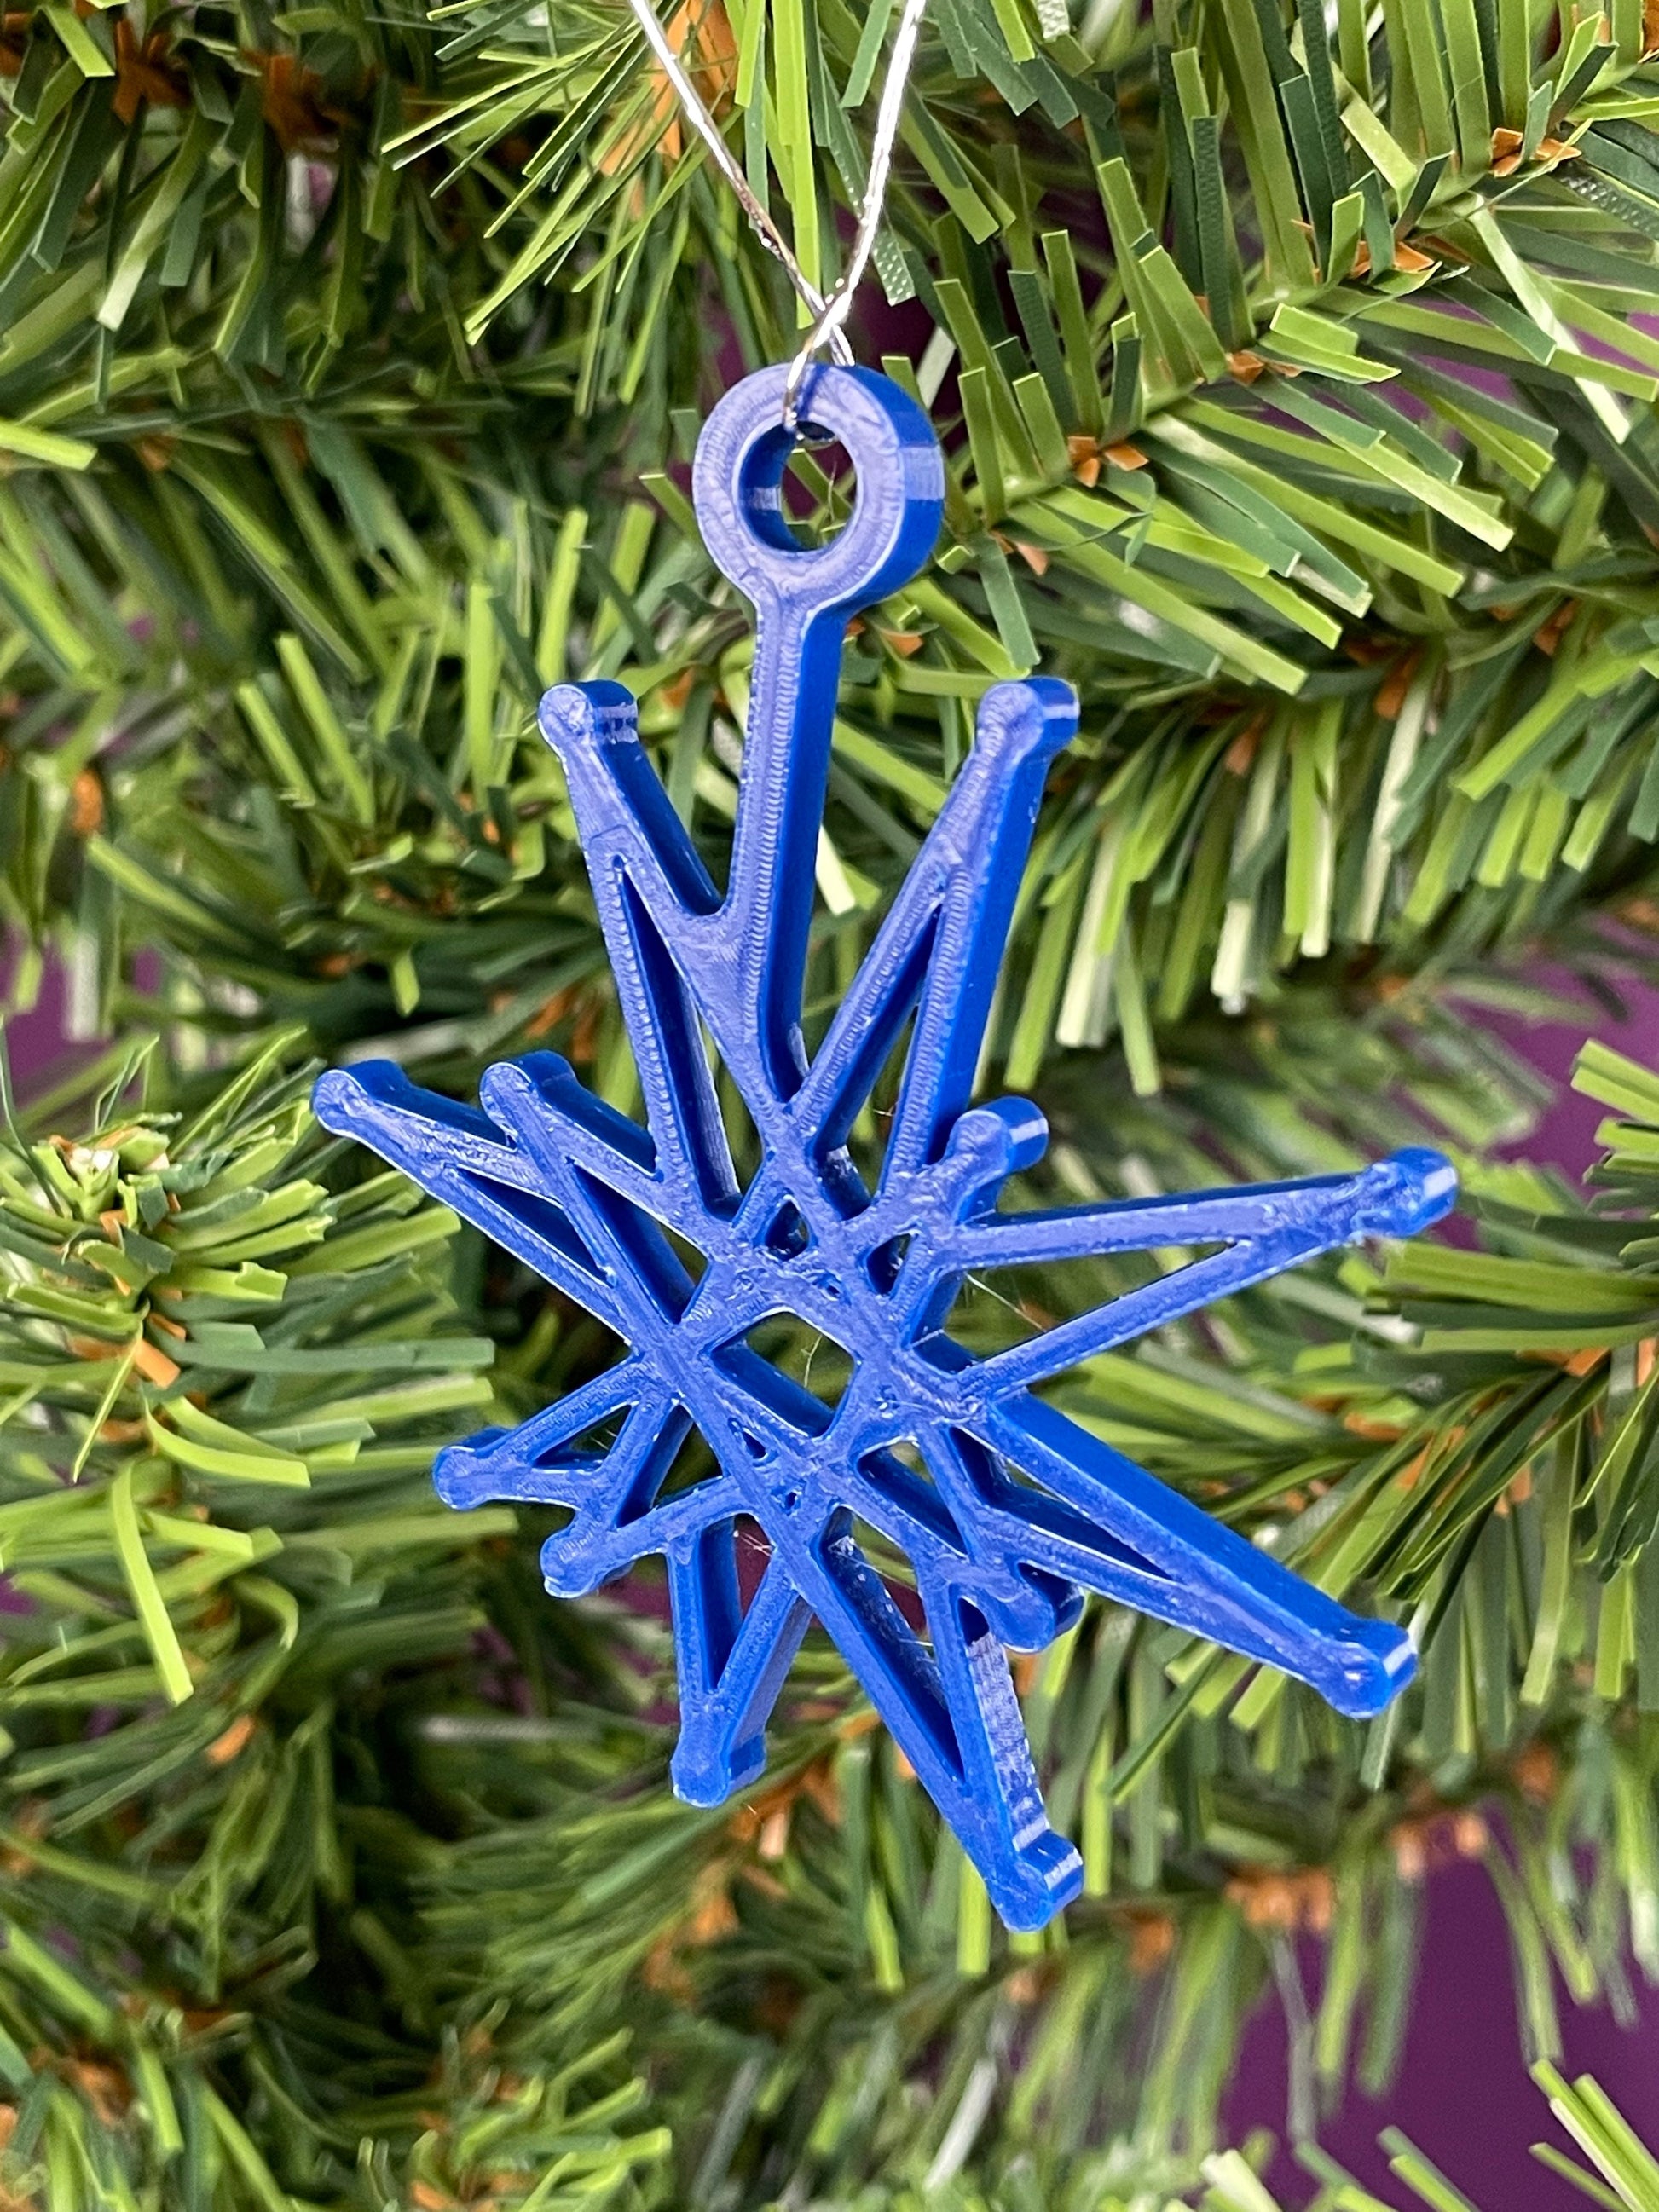 A close up of a fractal starburst ornament hung on a christmas tree with a purple background.